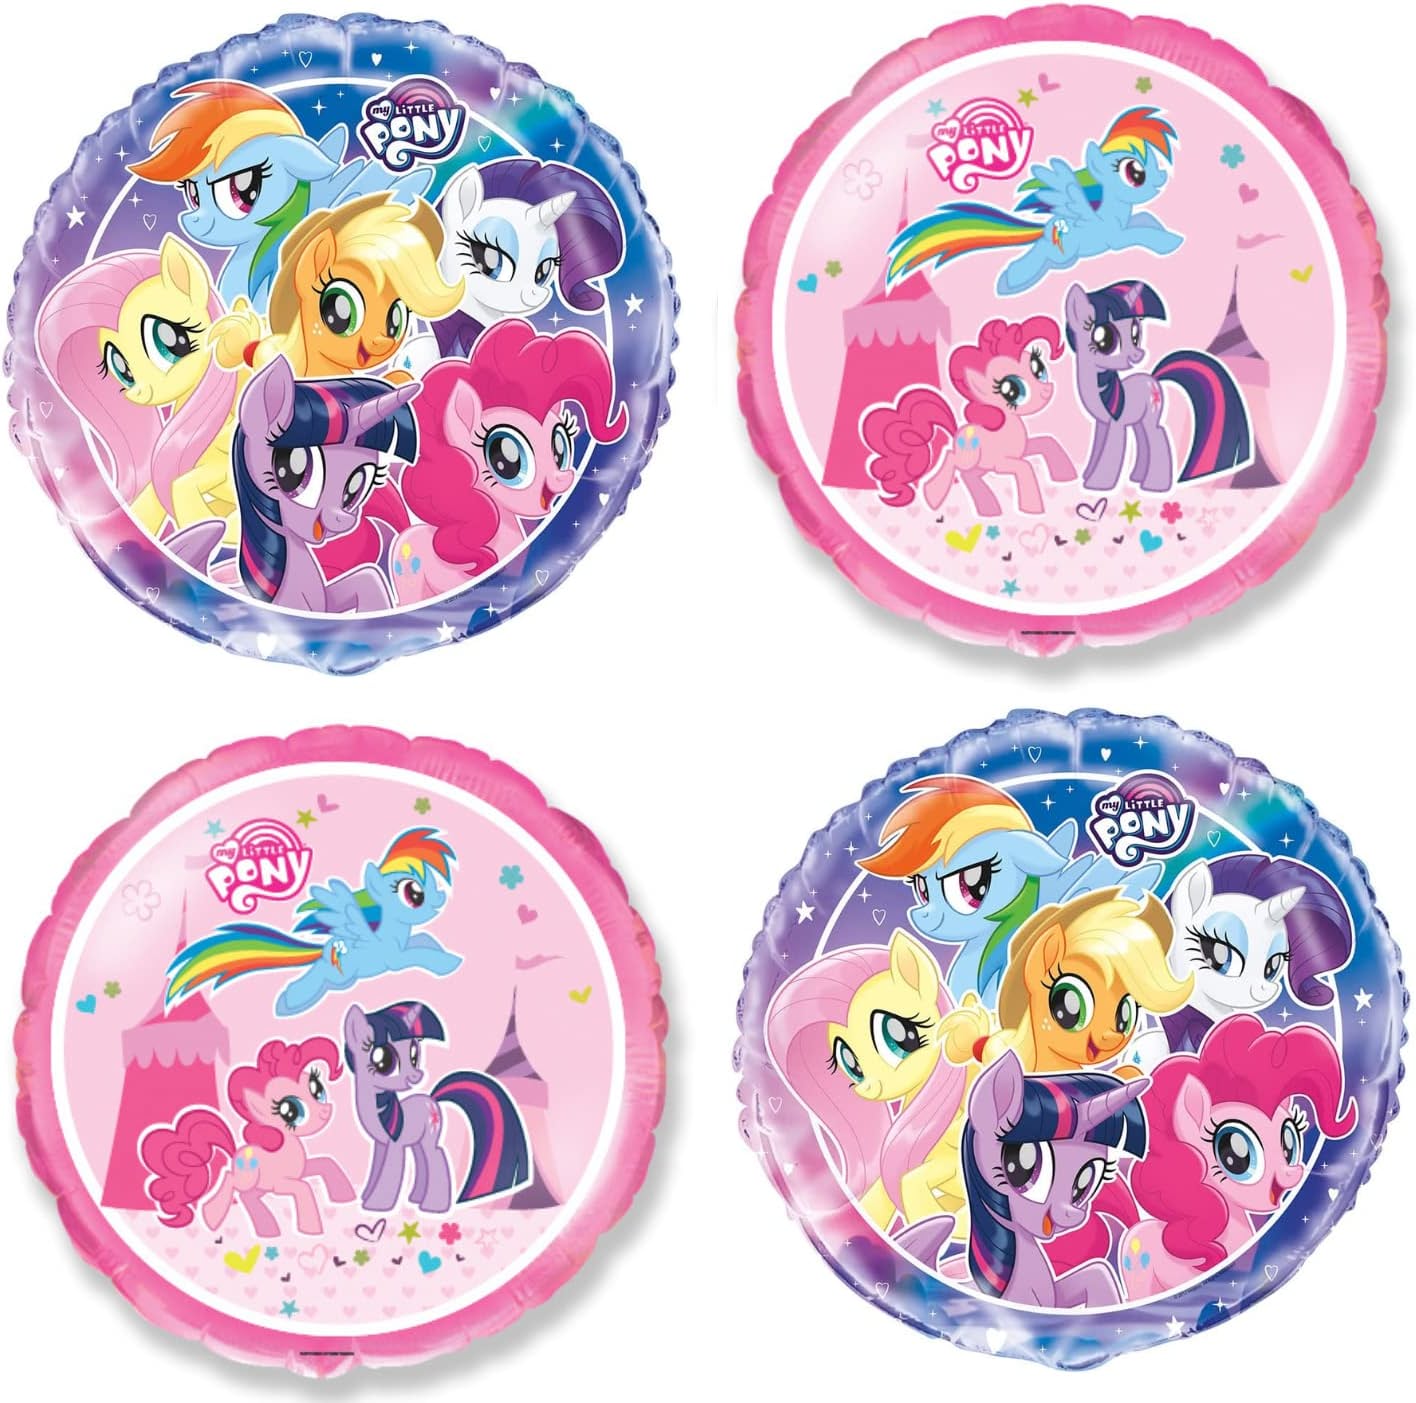 MLP Character Party Balloons 4-Pack Set 1